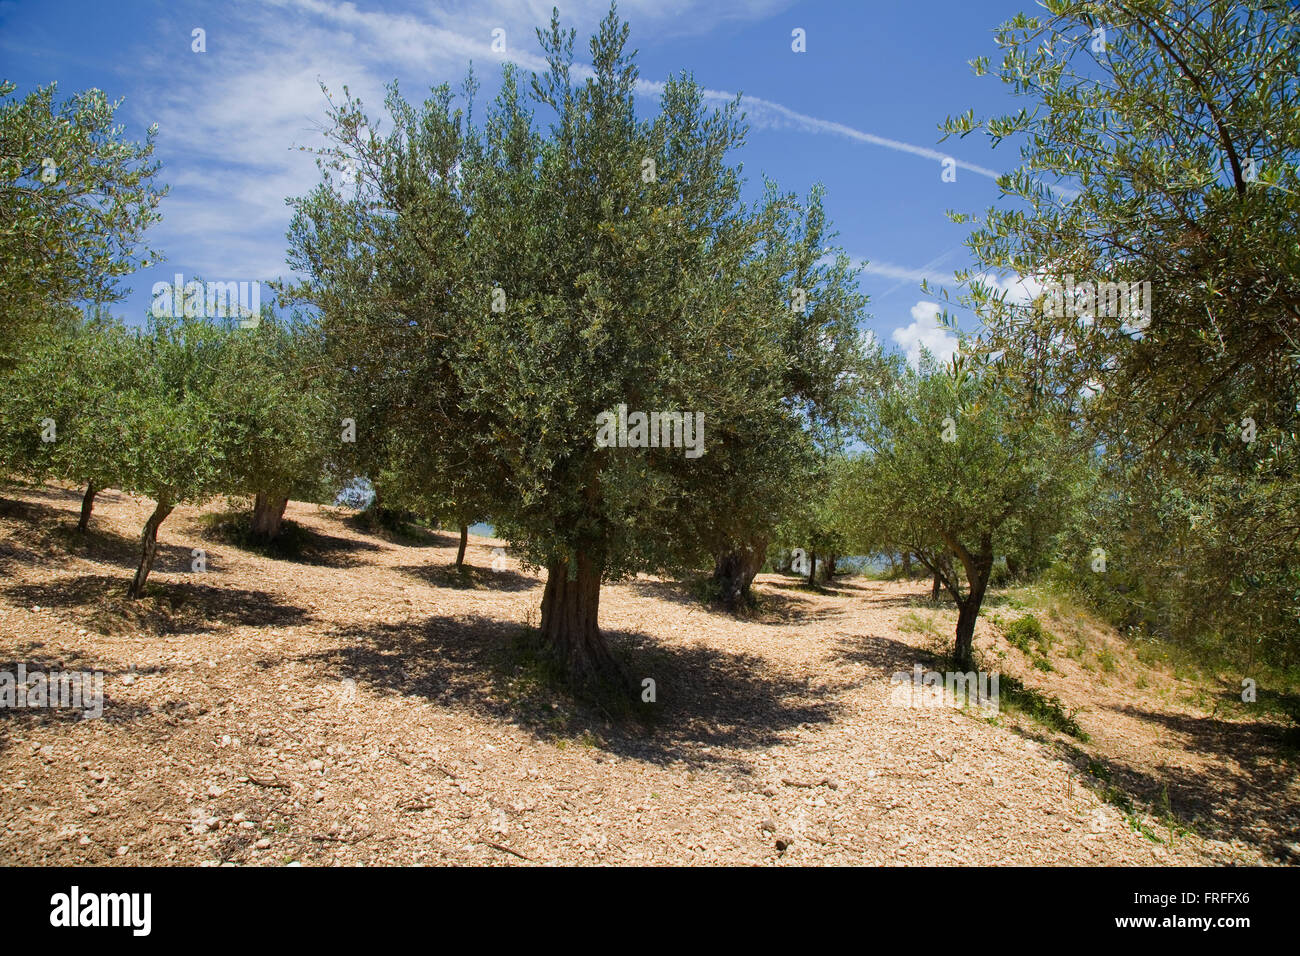 View of olive trees in an olive grove, in Italy Stock Photo